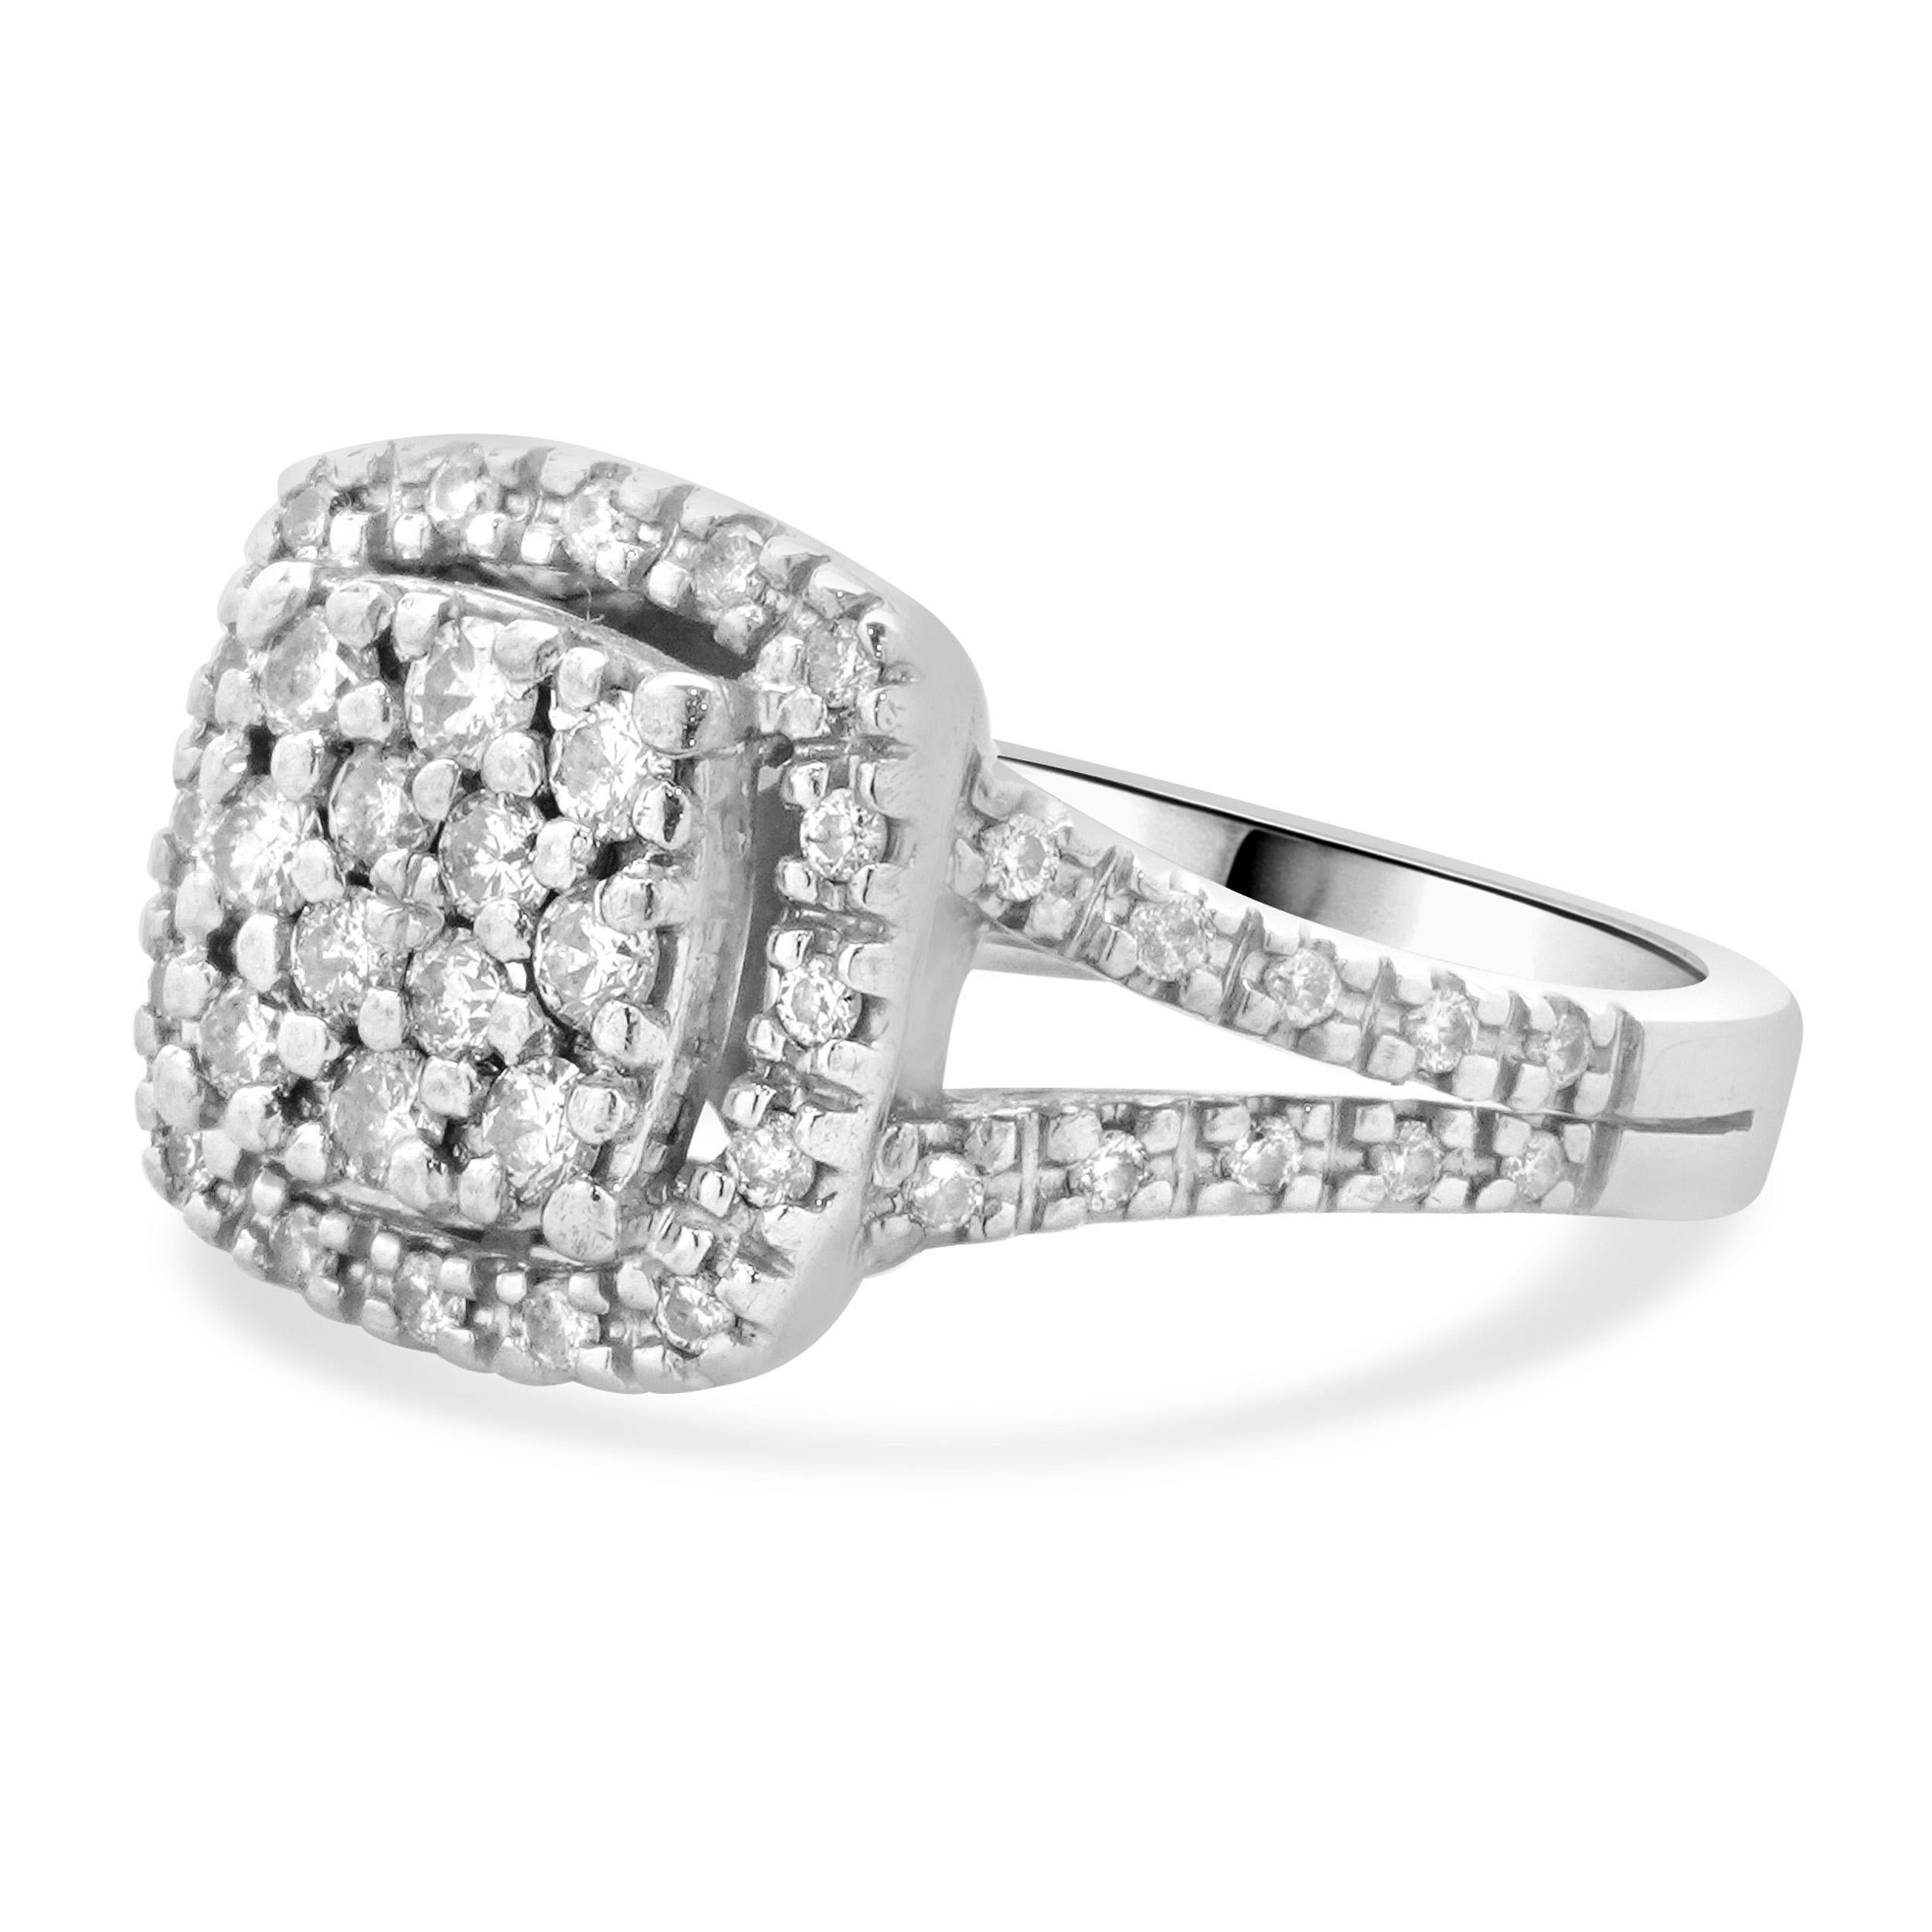 10 Karat White Gold Pave Diamond Engagement Ring In Excellent Condition For Sale In Scottsdale, AZ